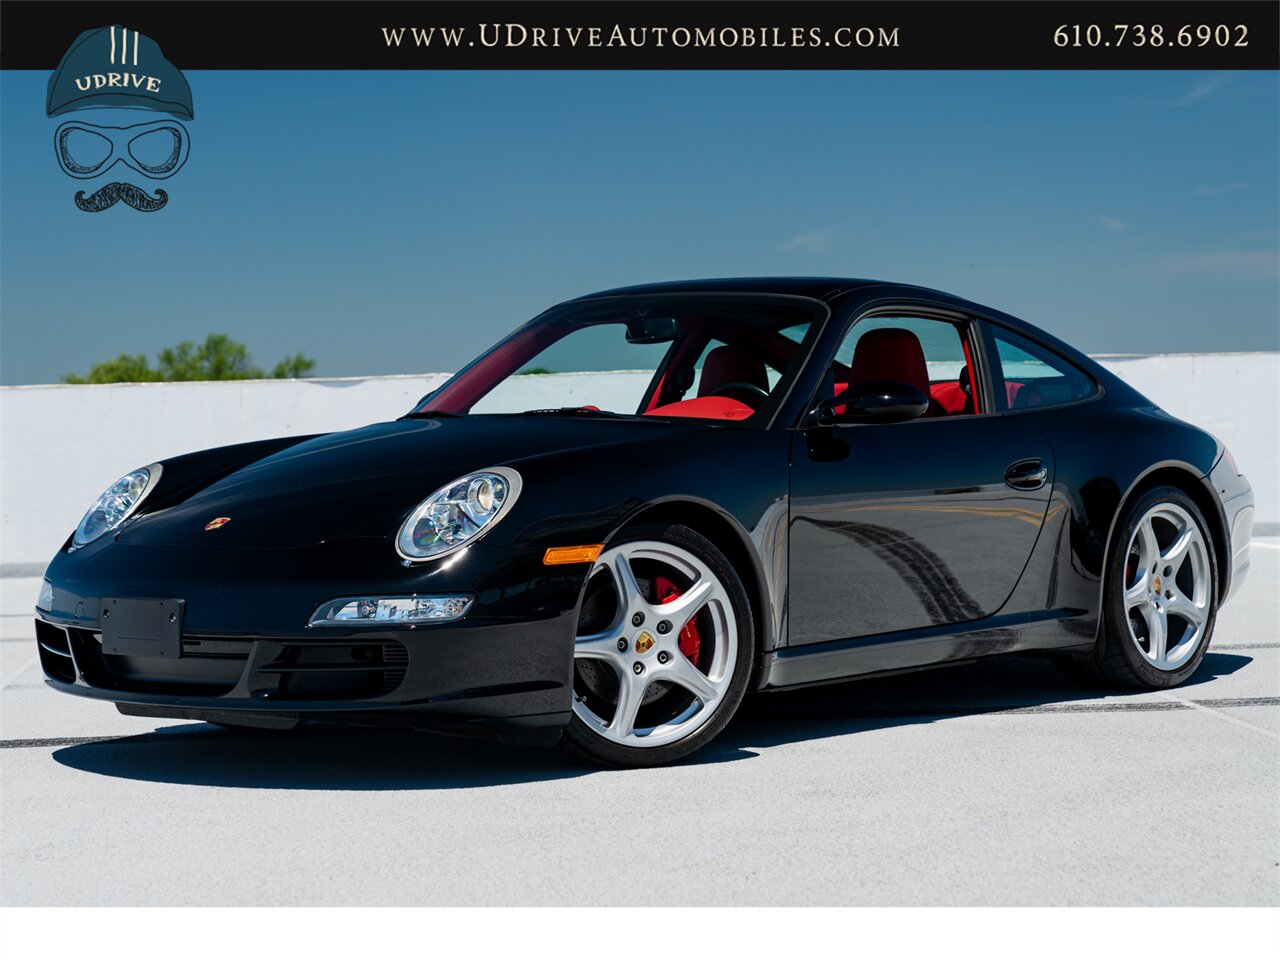 2005 Porsche 911 Carrera 911S 997 6 Speed 13k Miles Chrono  Leather to Sample Boxster Red/Blk Service History - Photo 1 - West Chester, PA 19382